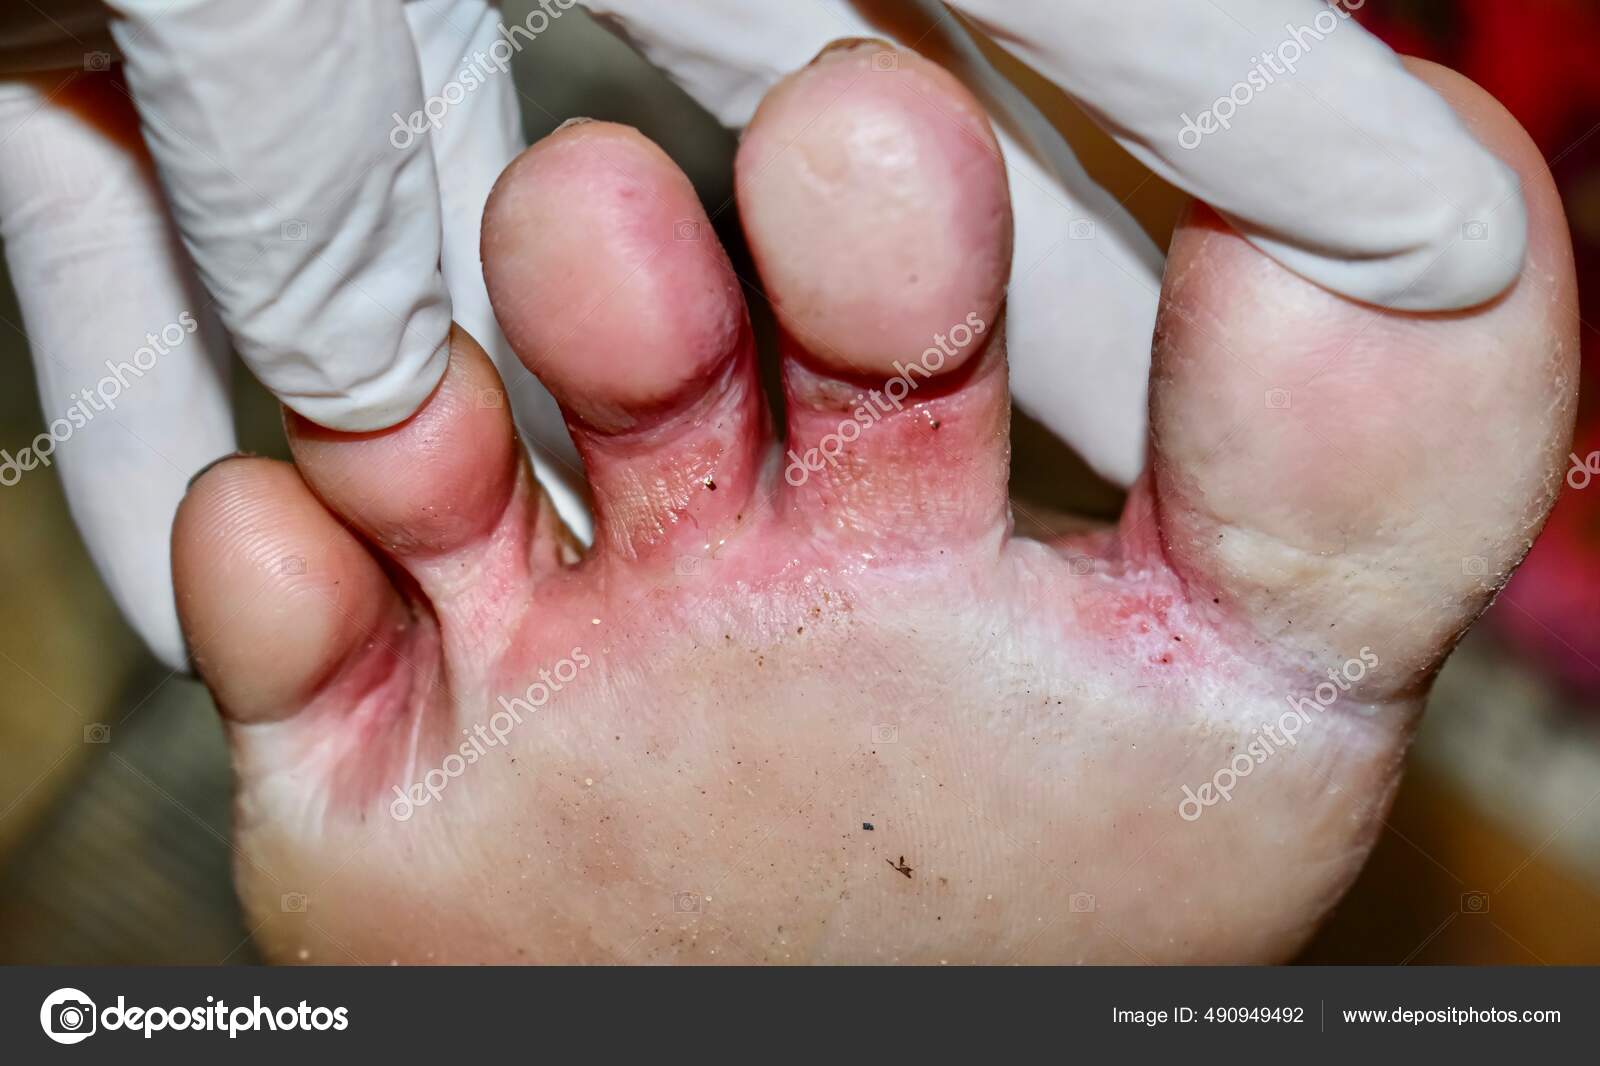 Fungal Infection Called Tinea Pedis Foot Asian Woman Itching